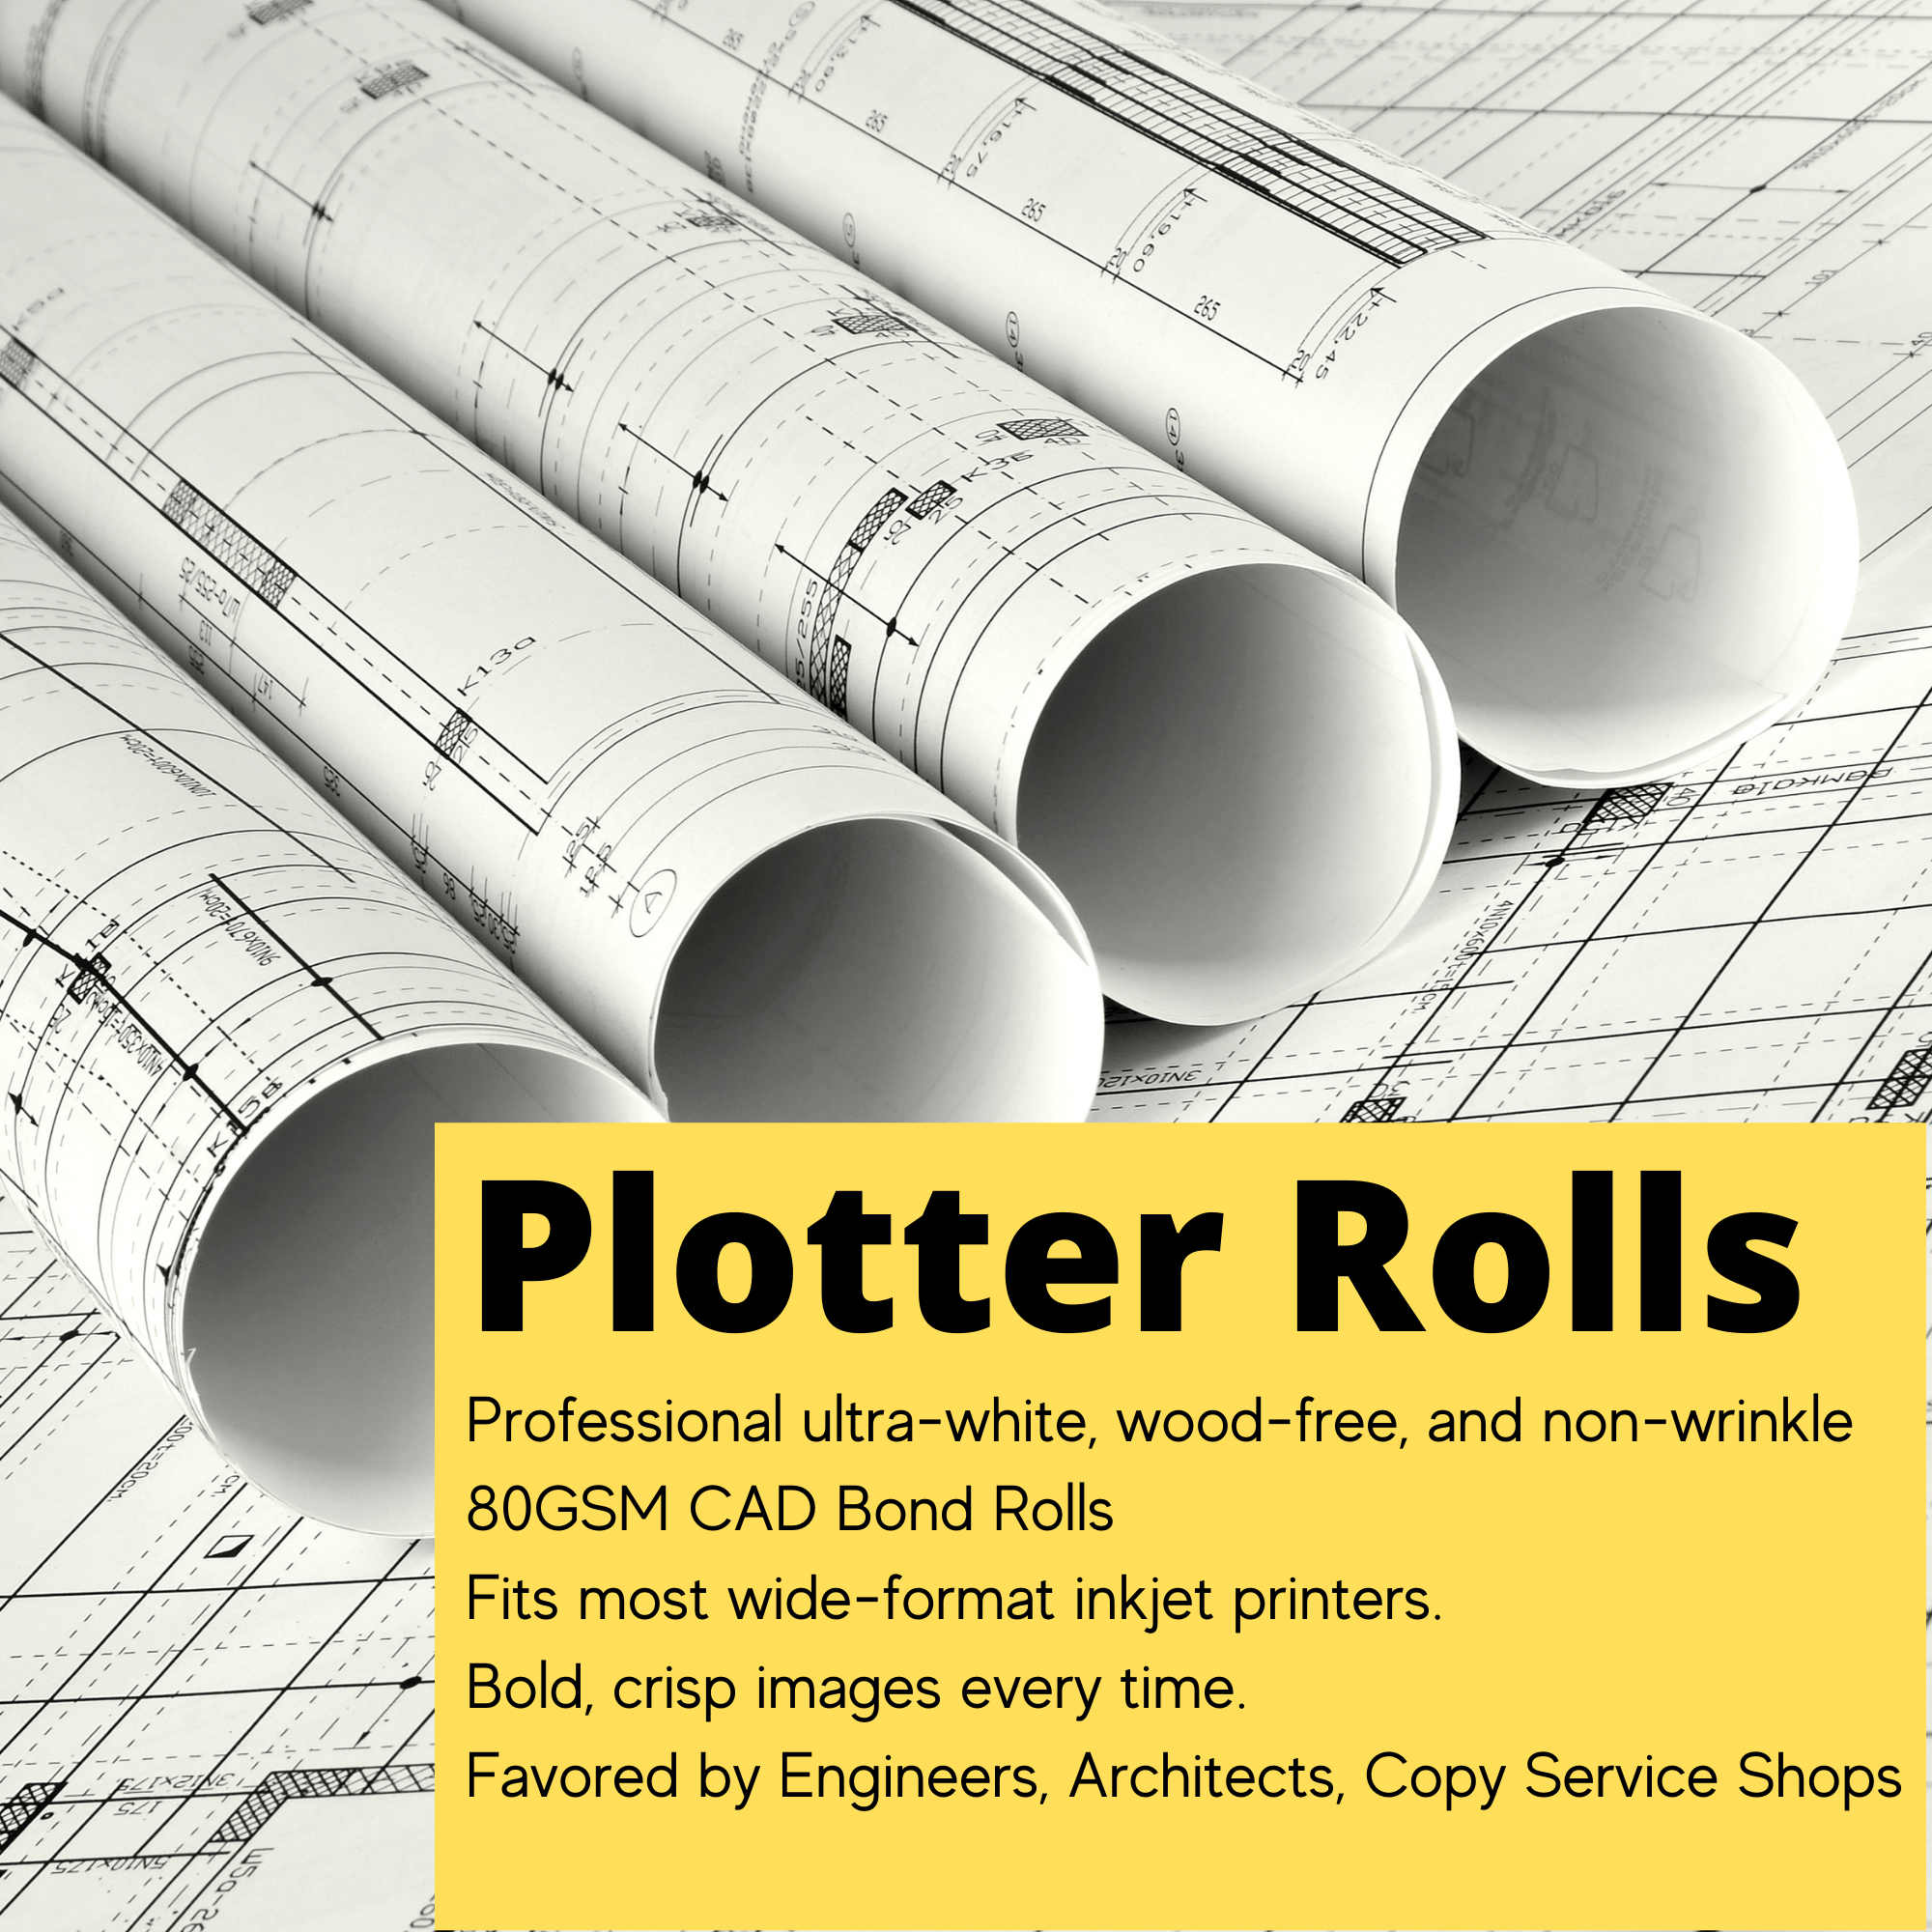 (4 rolls) 24" x 150' Plotter Paper | CAD Paper Rolls | Ink Jet Bond Paper Rolls With 2” Core | Ultra-White, Wood-Free 80GSM 20LB Plotter Paper For Engineers, Architects, Copy Service Shops (4 ROLLS)